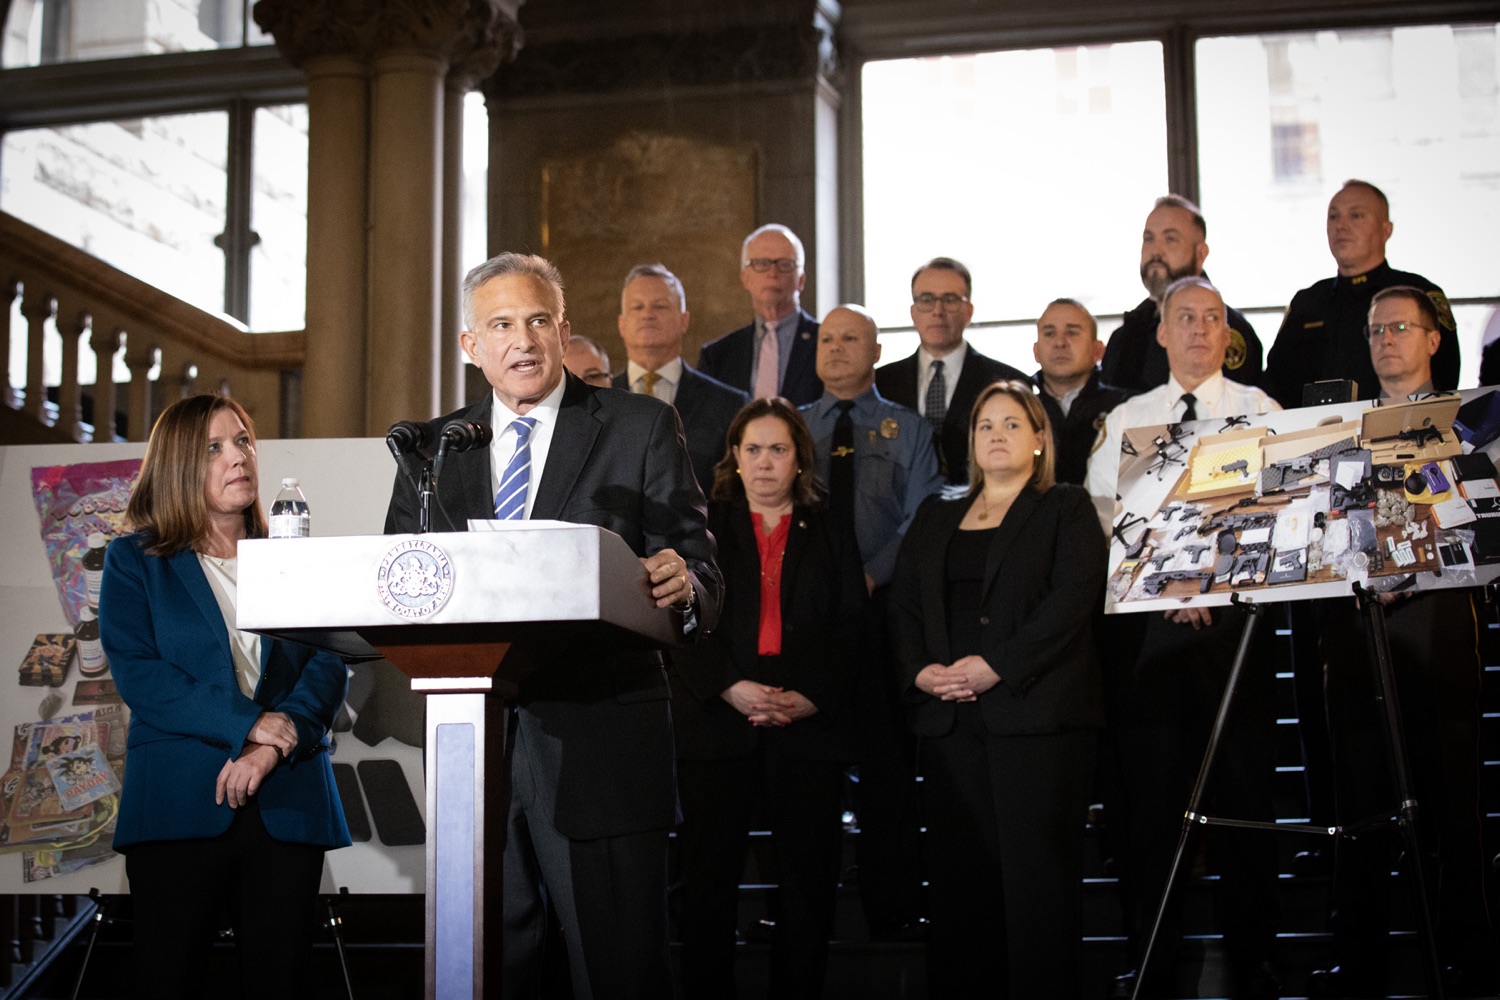 Pennsylvania Attorney General Michelle Henry and Allegheny County District Attorney Stephen Zappala were joined by law enforcement and community collaborators to announce a new public safety initiative in Allegheny County. Pictured here is Stephen Zappala, Allegheny County District Attorney, delivering remarks during the event. Pittsburgh, Pennsylvania.<br><a href="https://filesource.amperwave.net/commonwealthofpa/photo/24297_oag_publicSafety_JAP_05.jpg" target="_blank">⇣ Download Photo</a>